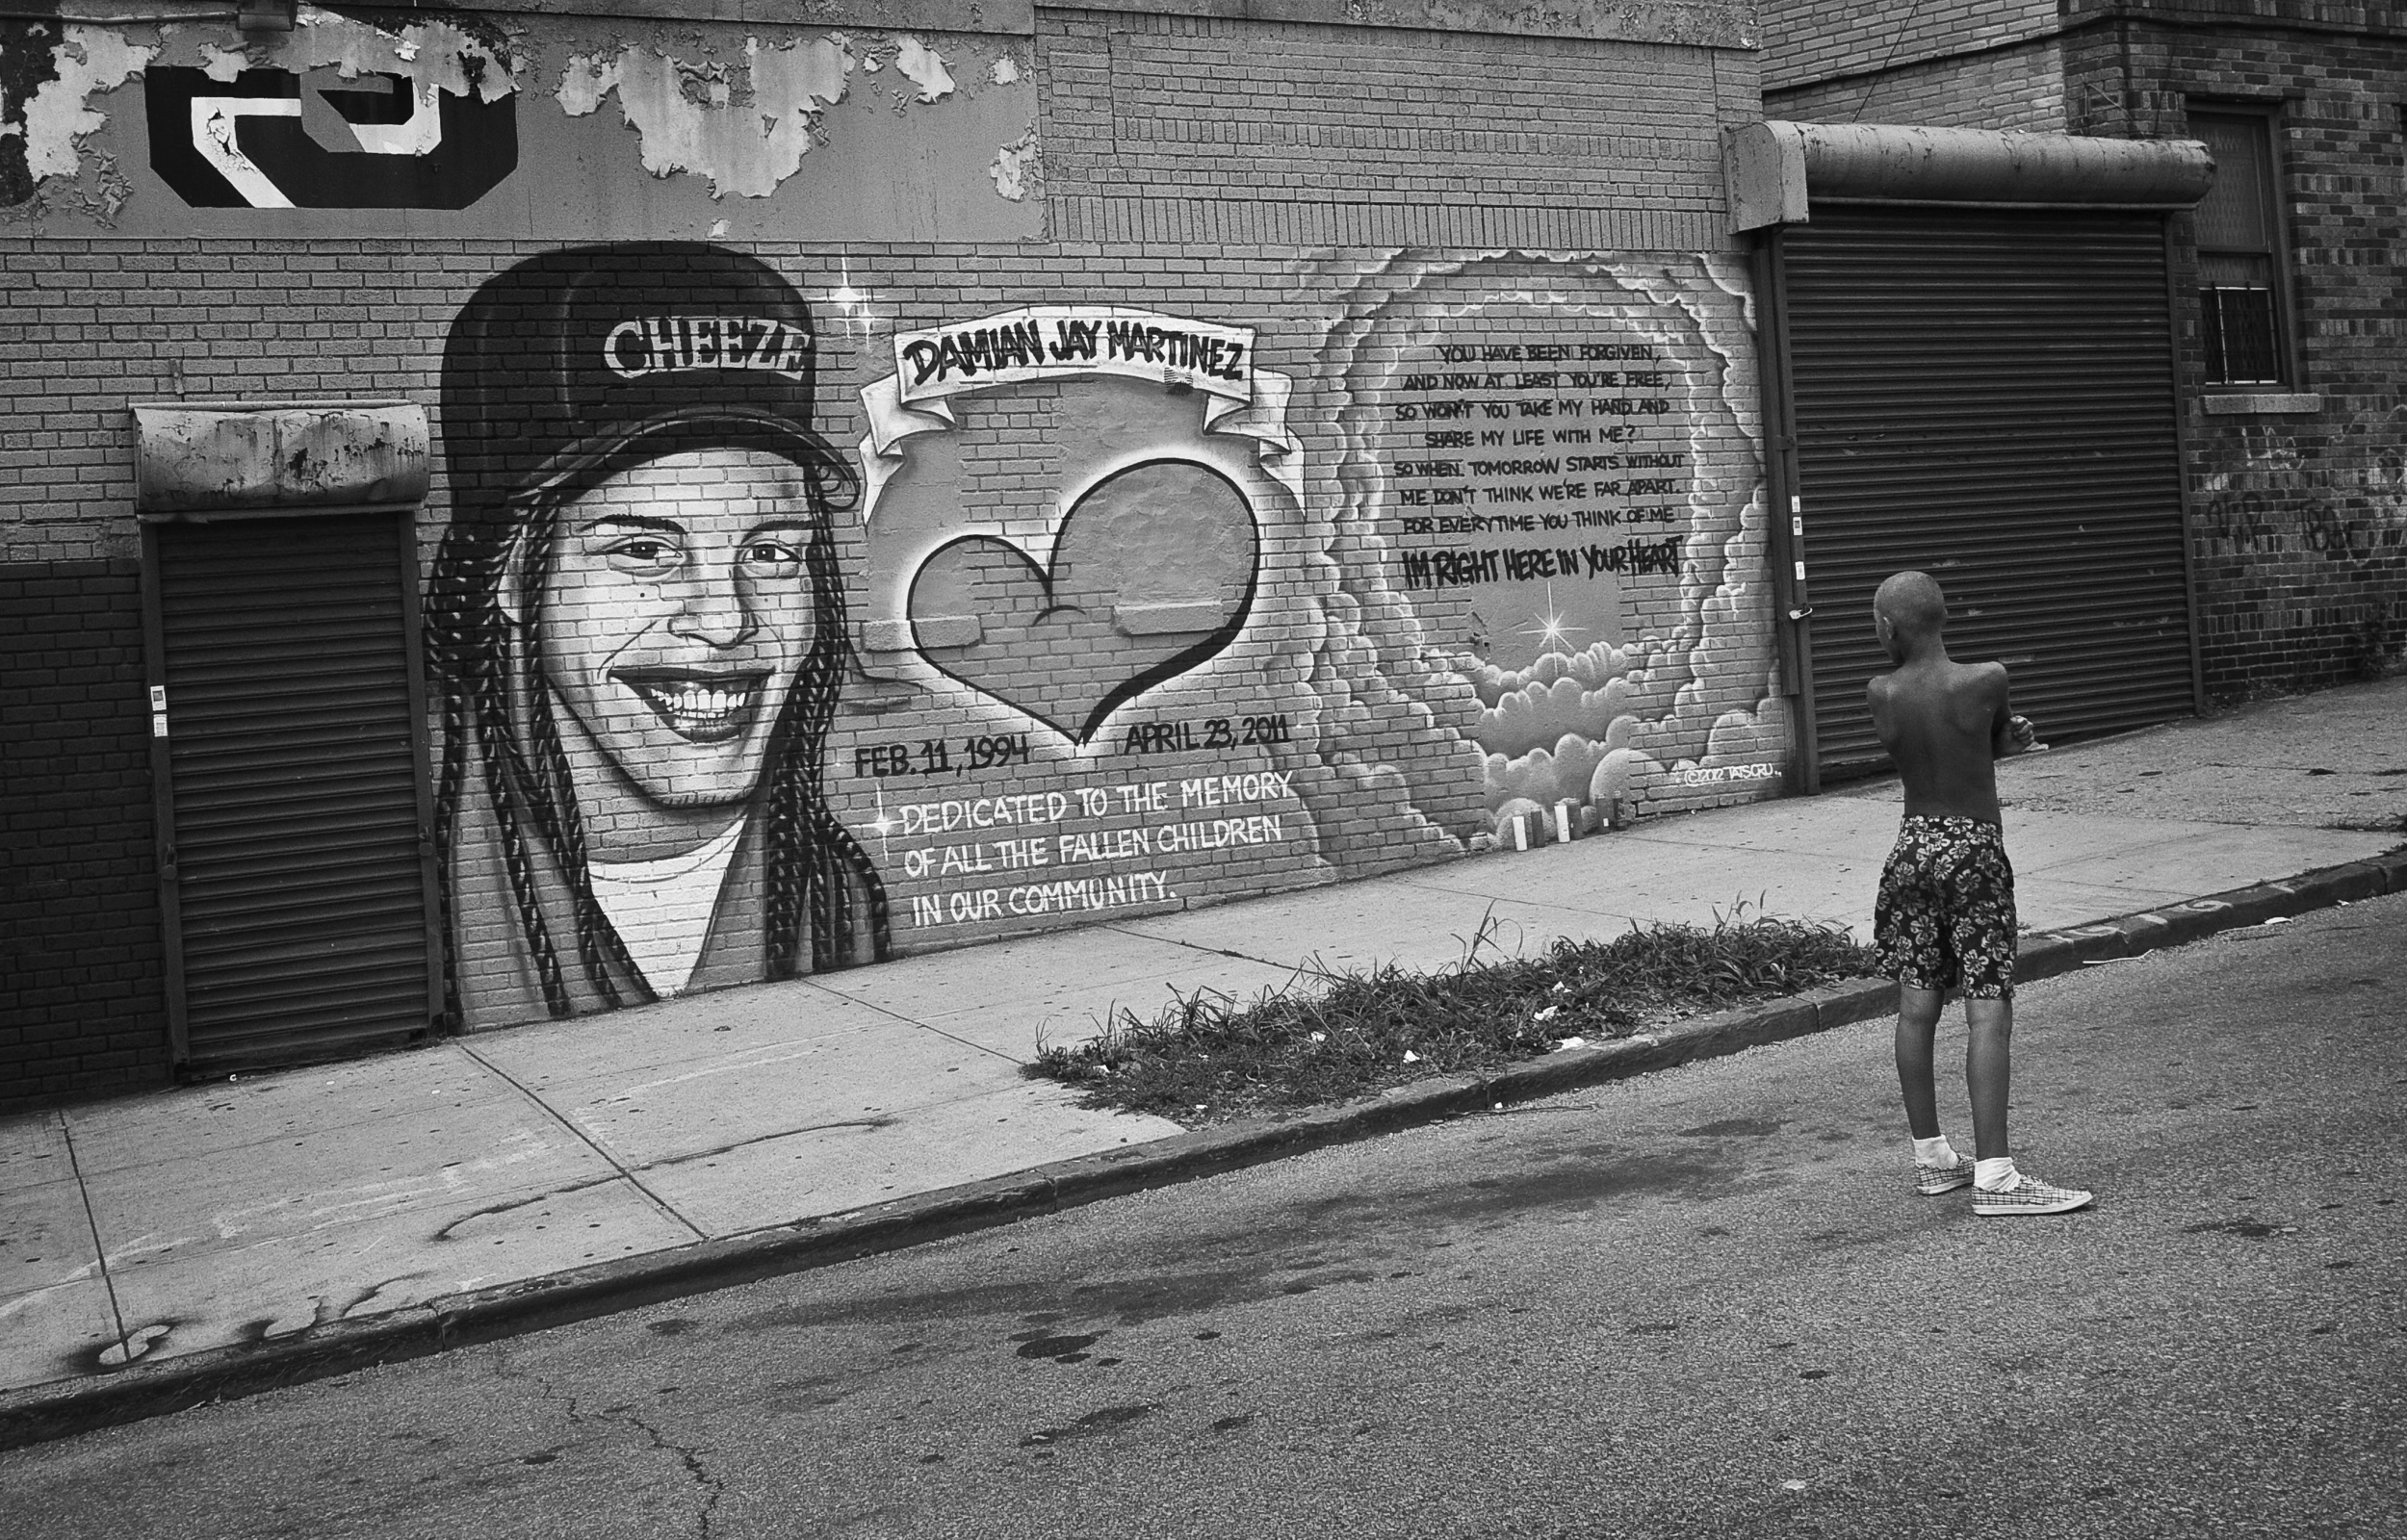 Damien "CHEEZE" Martinez Mural. Hunts Point, the Bronx, NYC. August 2012.